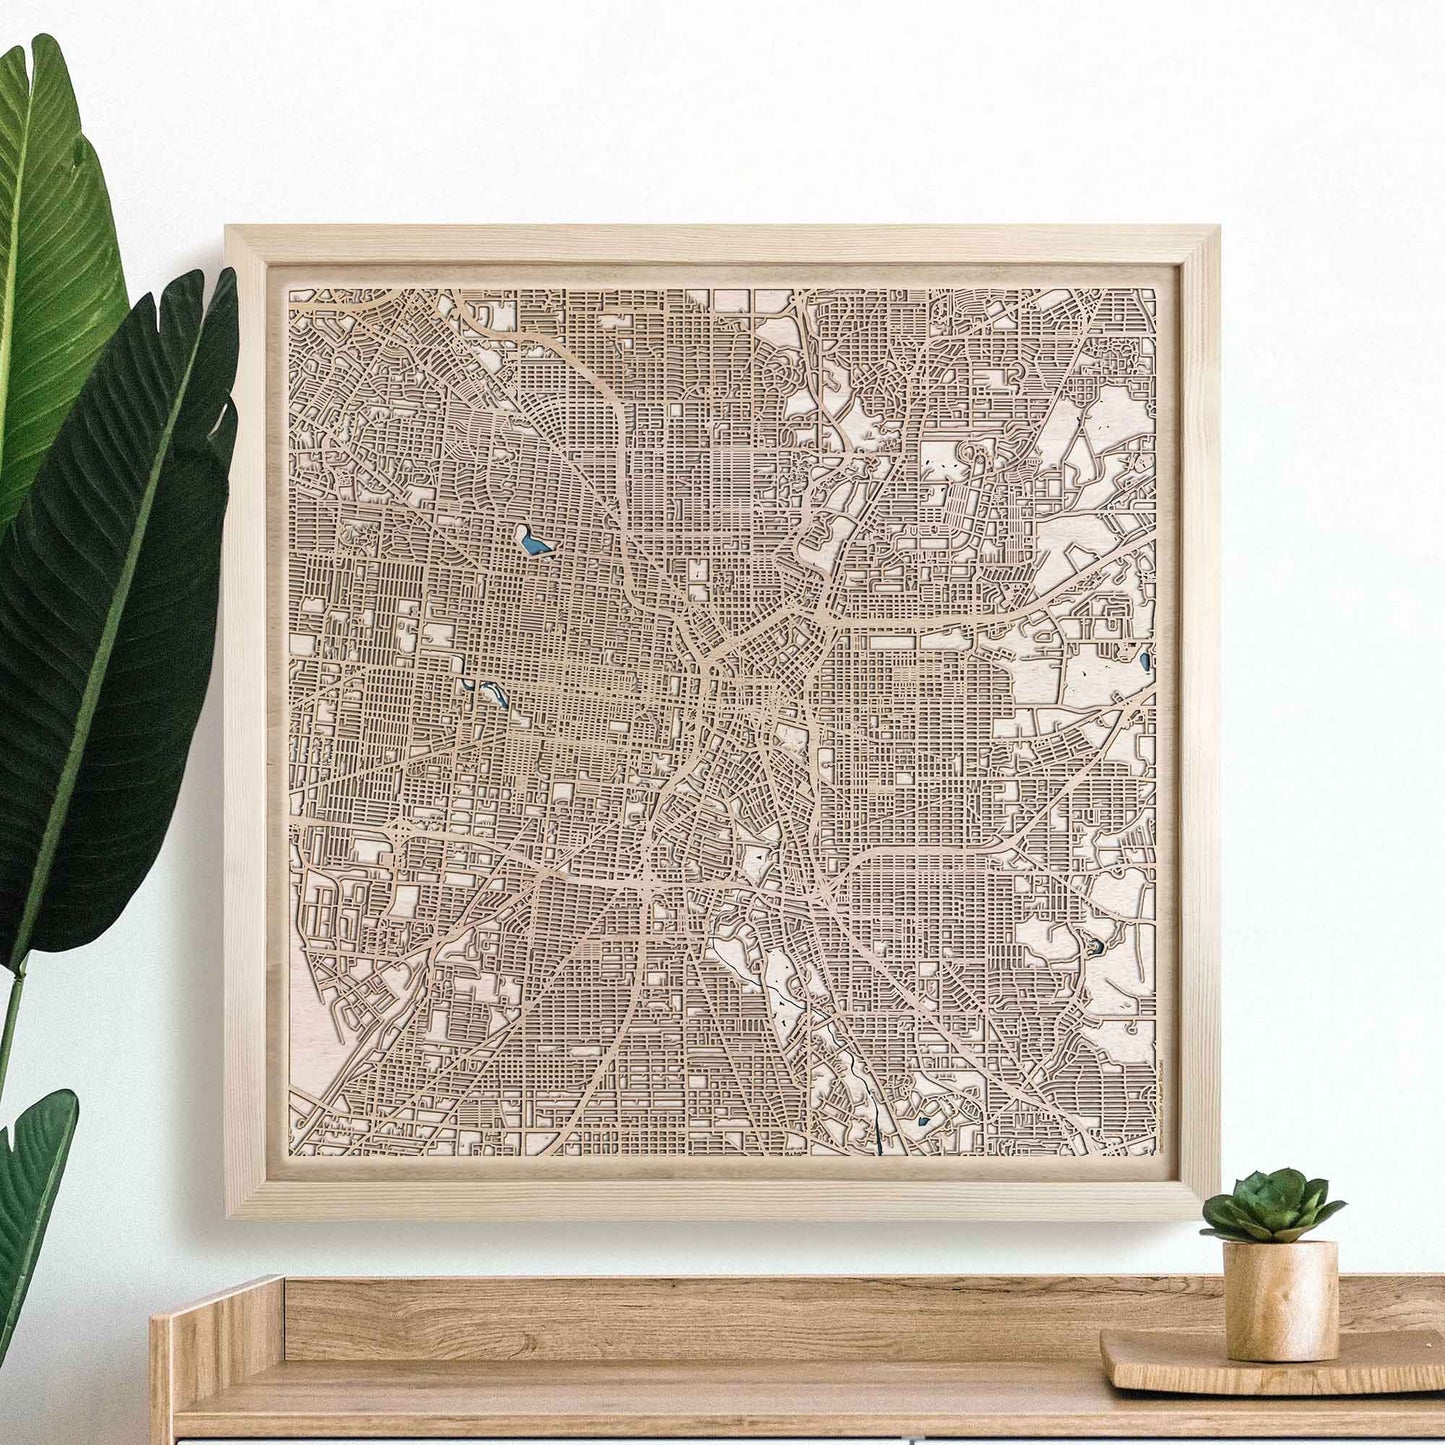 San Antonio Wooden Map by CityWood - Custom Wood Map Art - Unique Laser Cut Engraved - Anniversary Gift